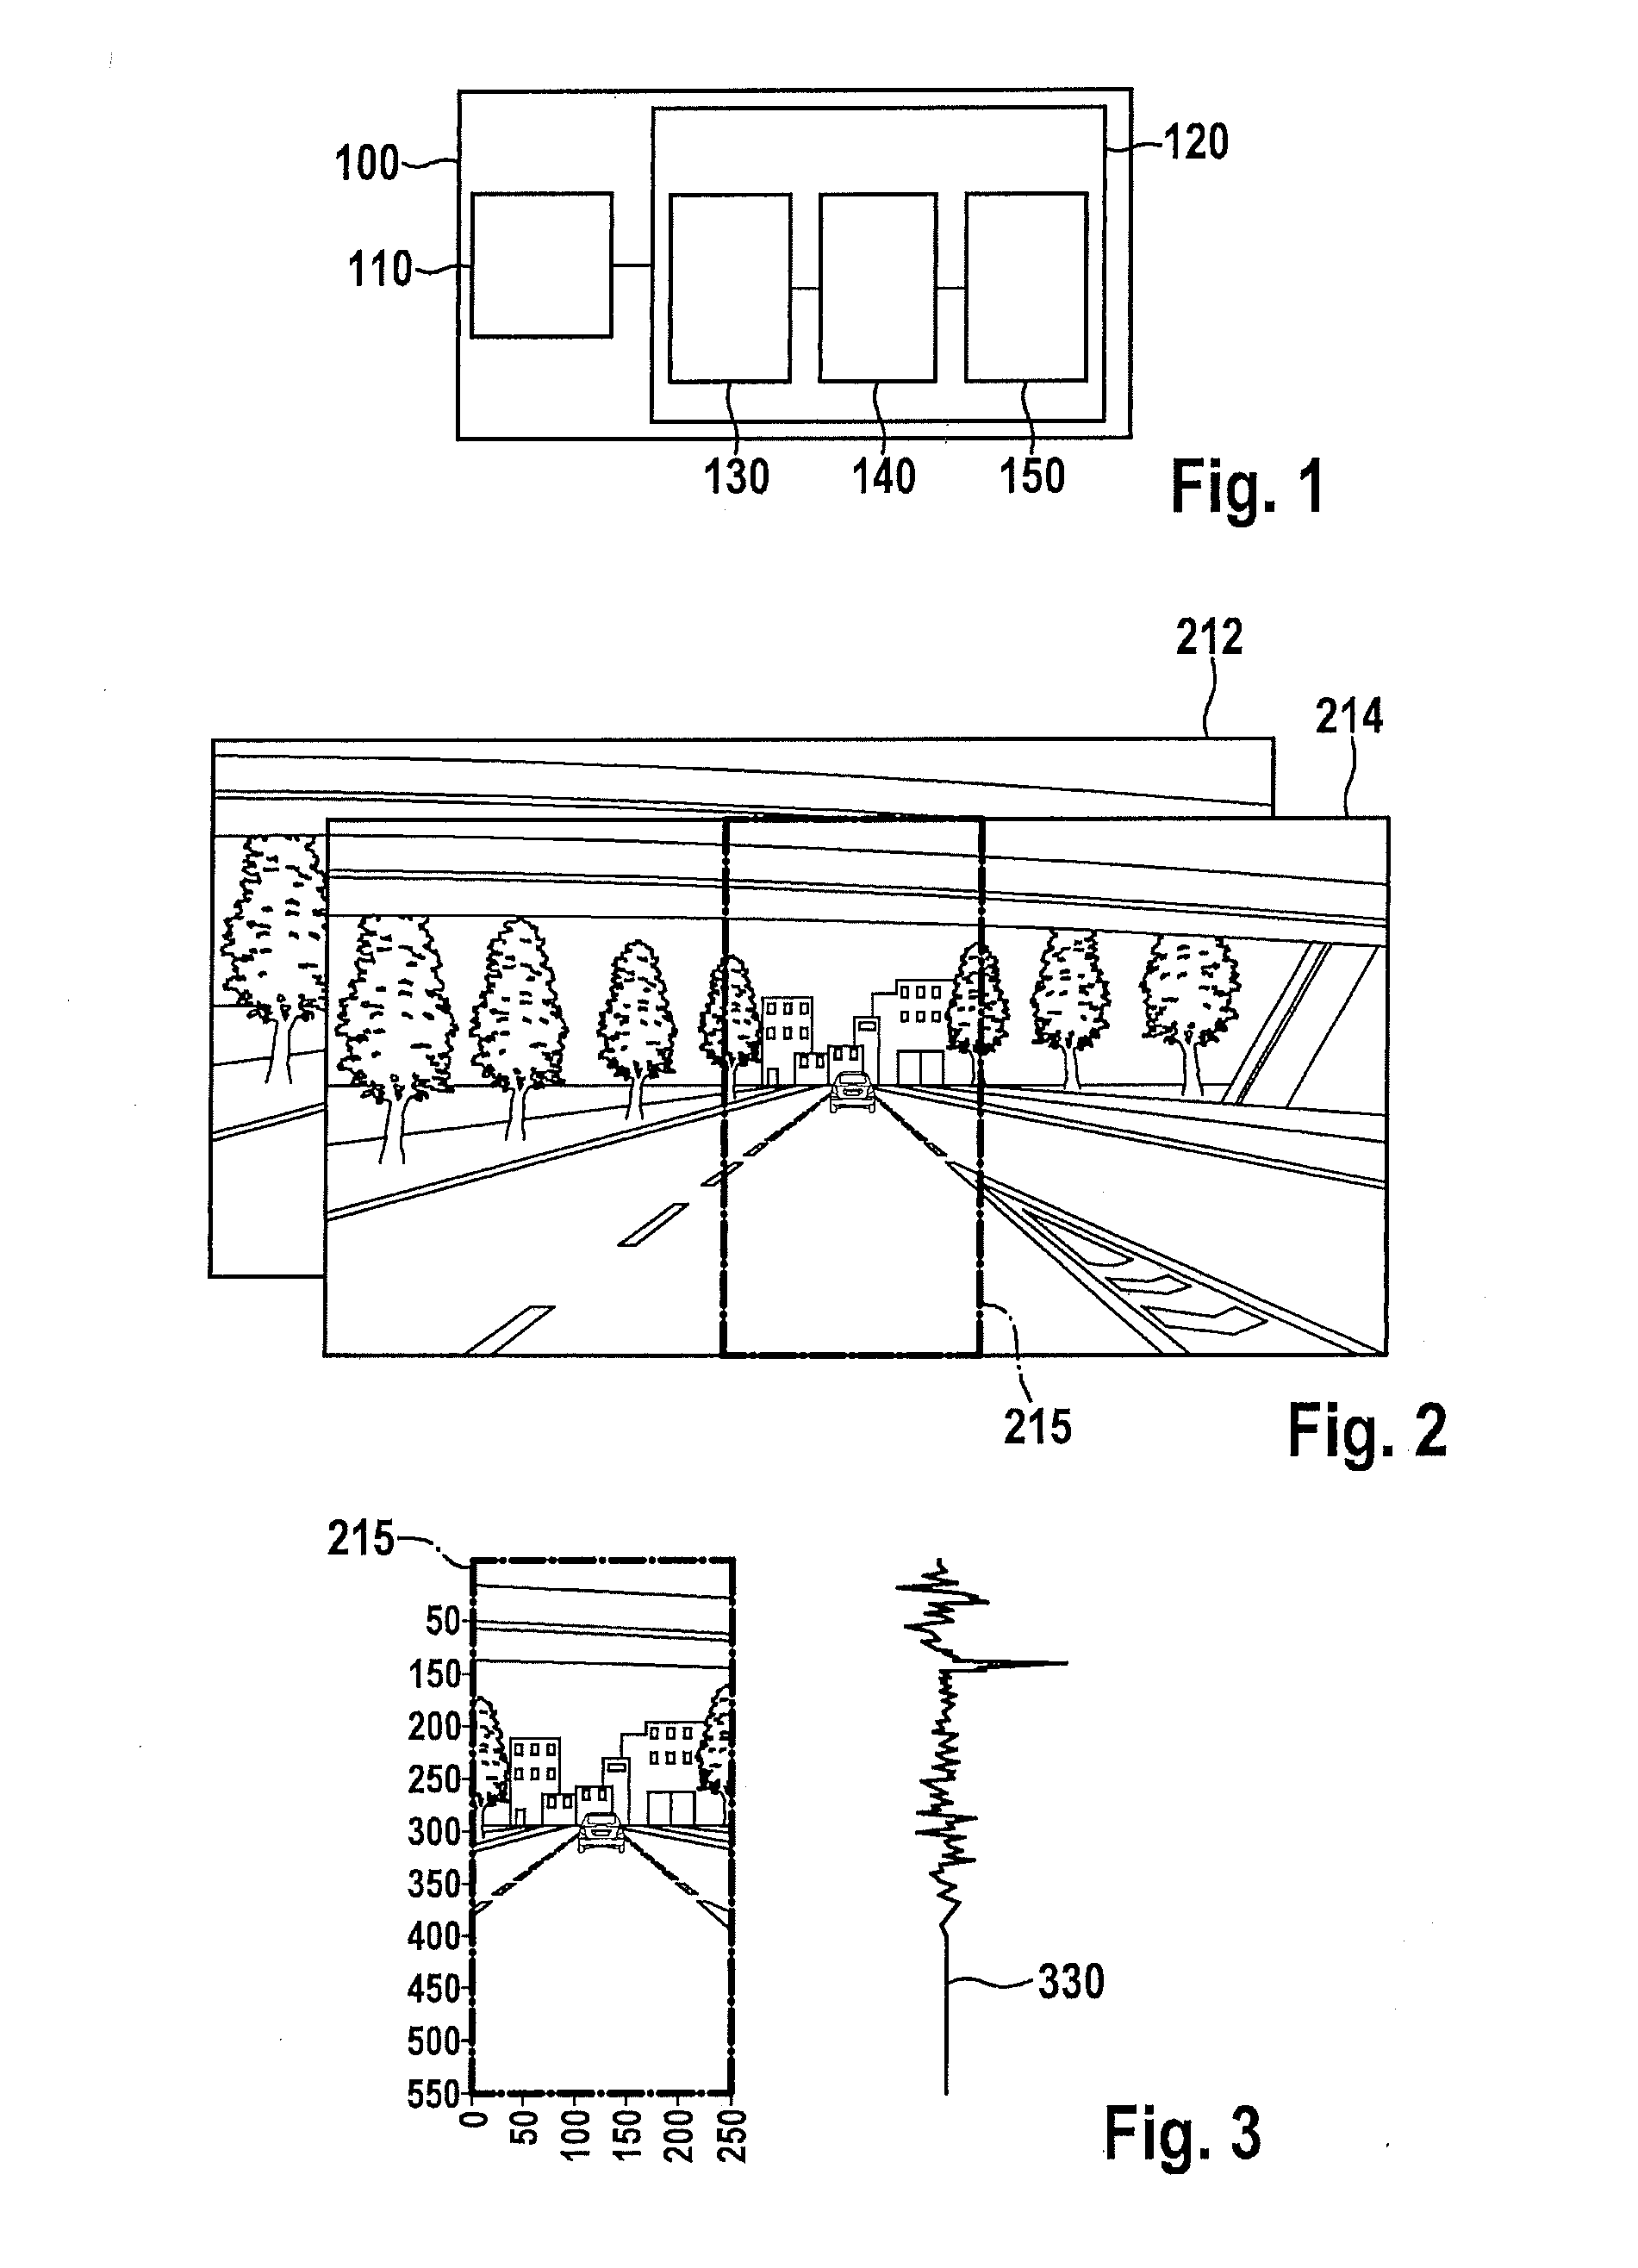 Method for determining a pitch of a camera installed in a vehicle and method for controling a light emission of at least one headlight of a vehicle.